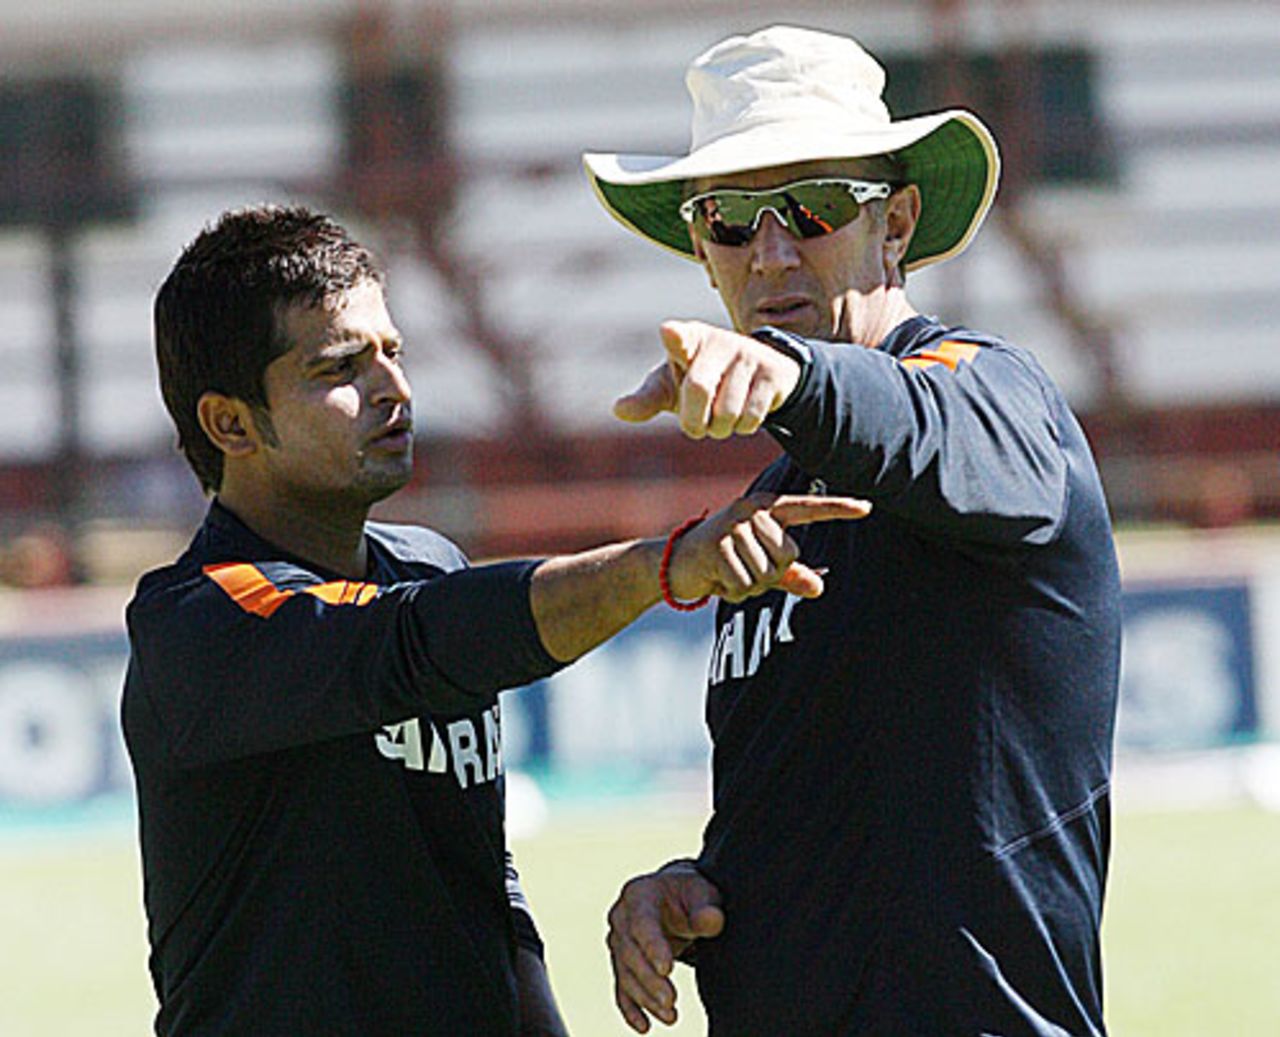 Conflicting viewpoints - Suresh Raina in discussion with bowling coach Eric Simons, Bulawayo, May 27, 2010